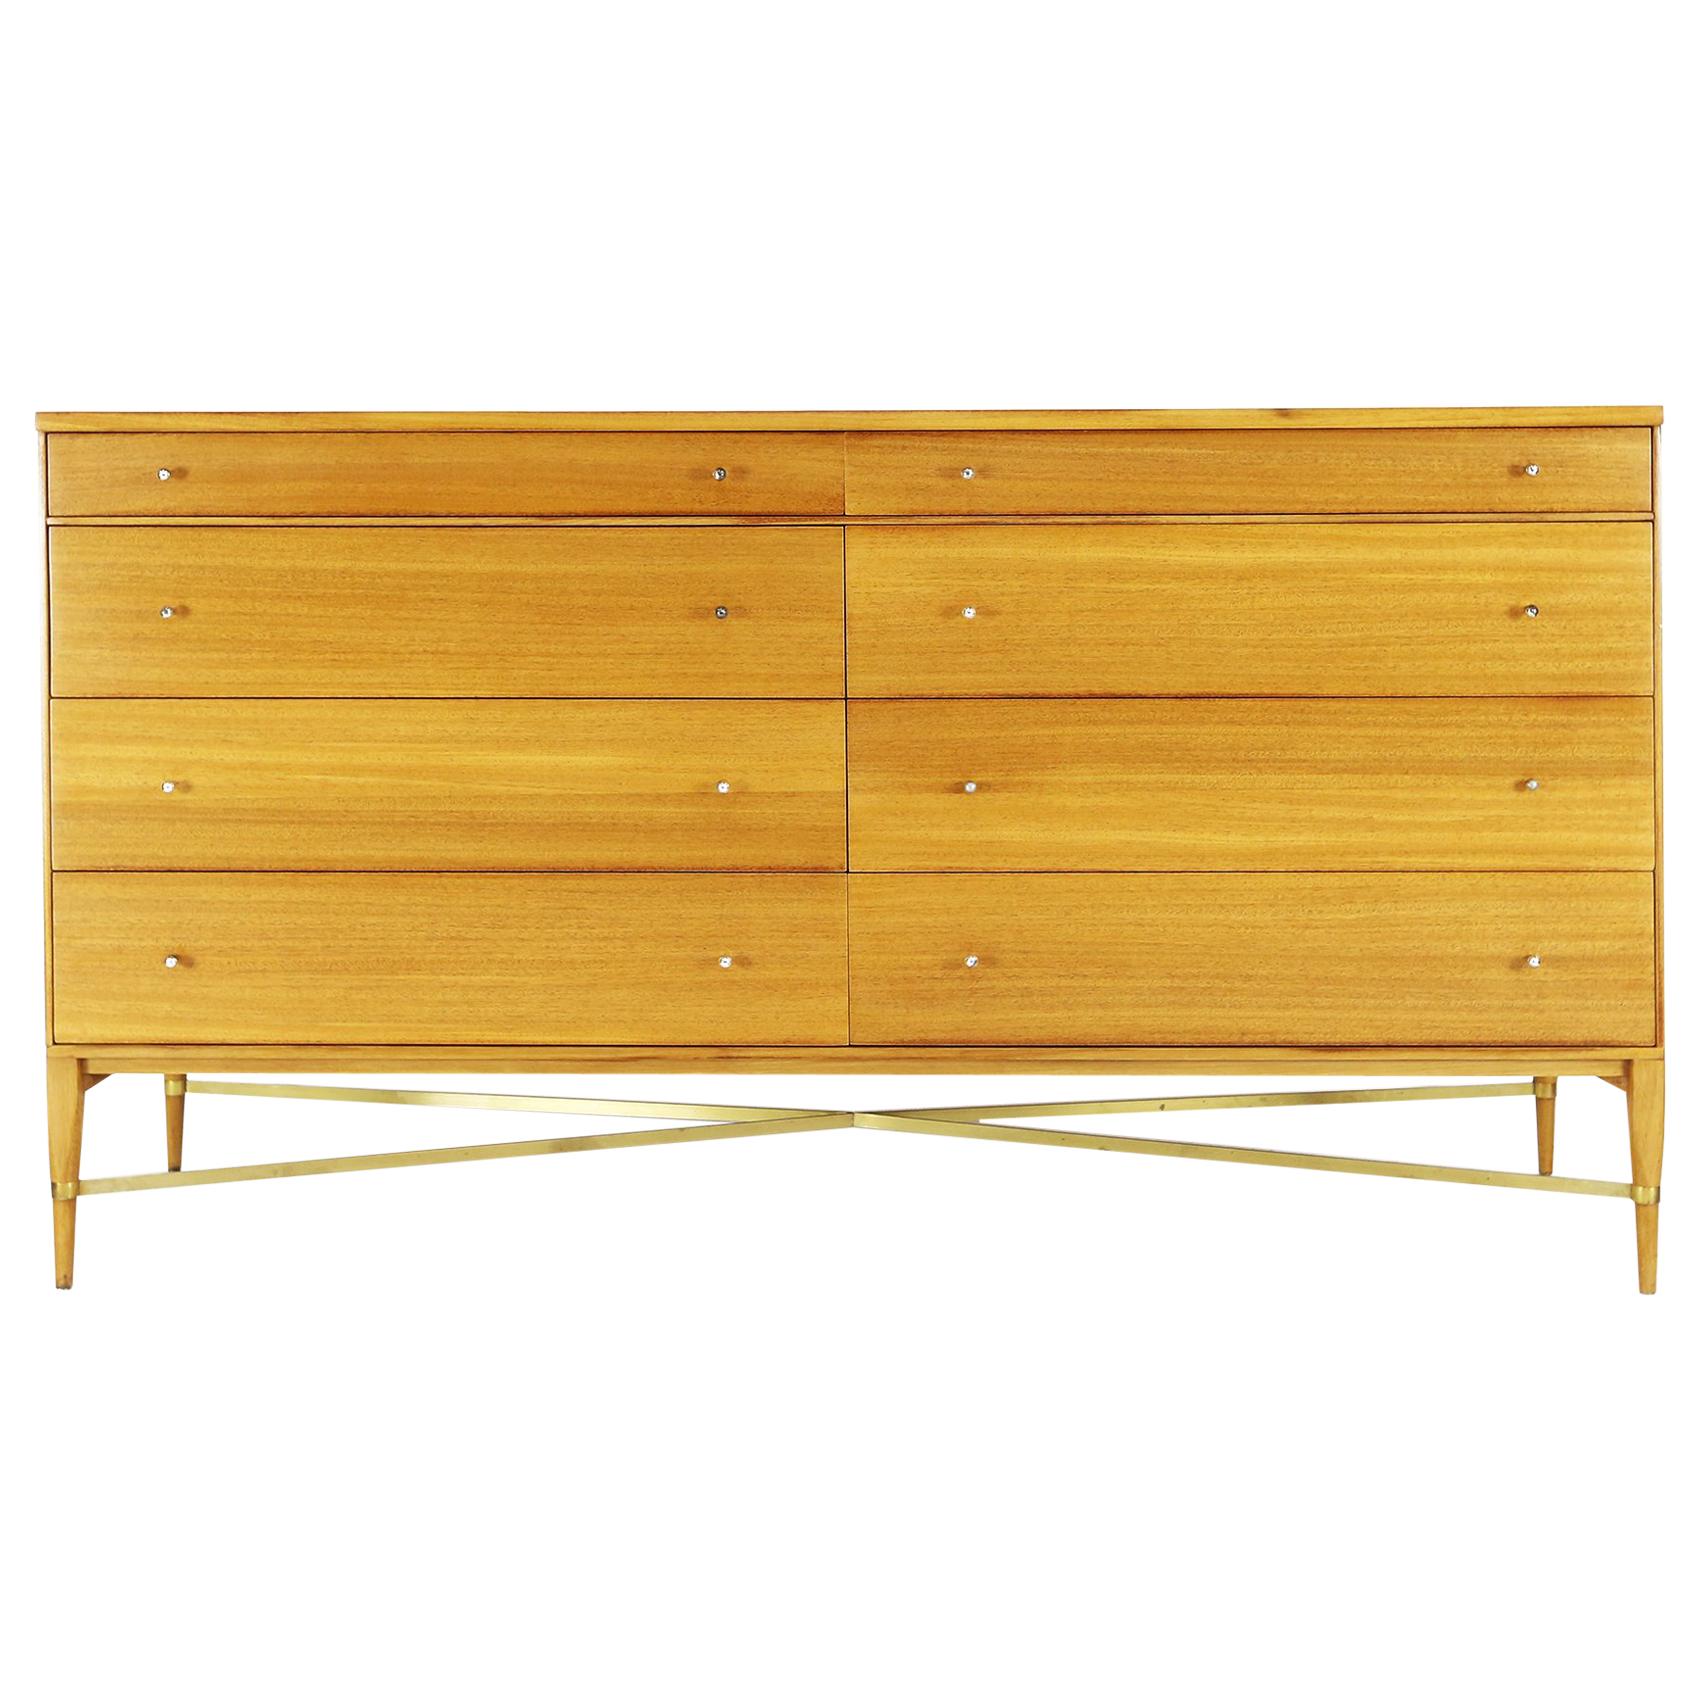 Paul McCobb Eight-Drawer Chest in Mahogany with Brass Cross Stretchers